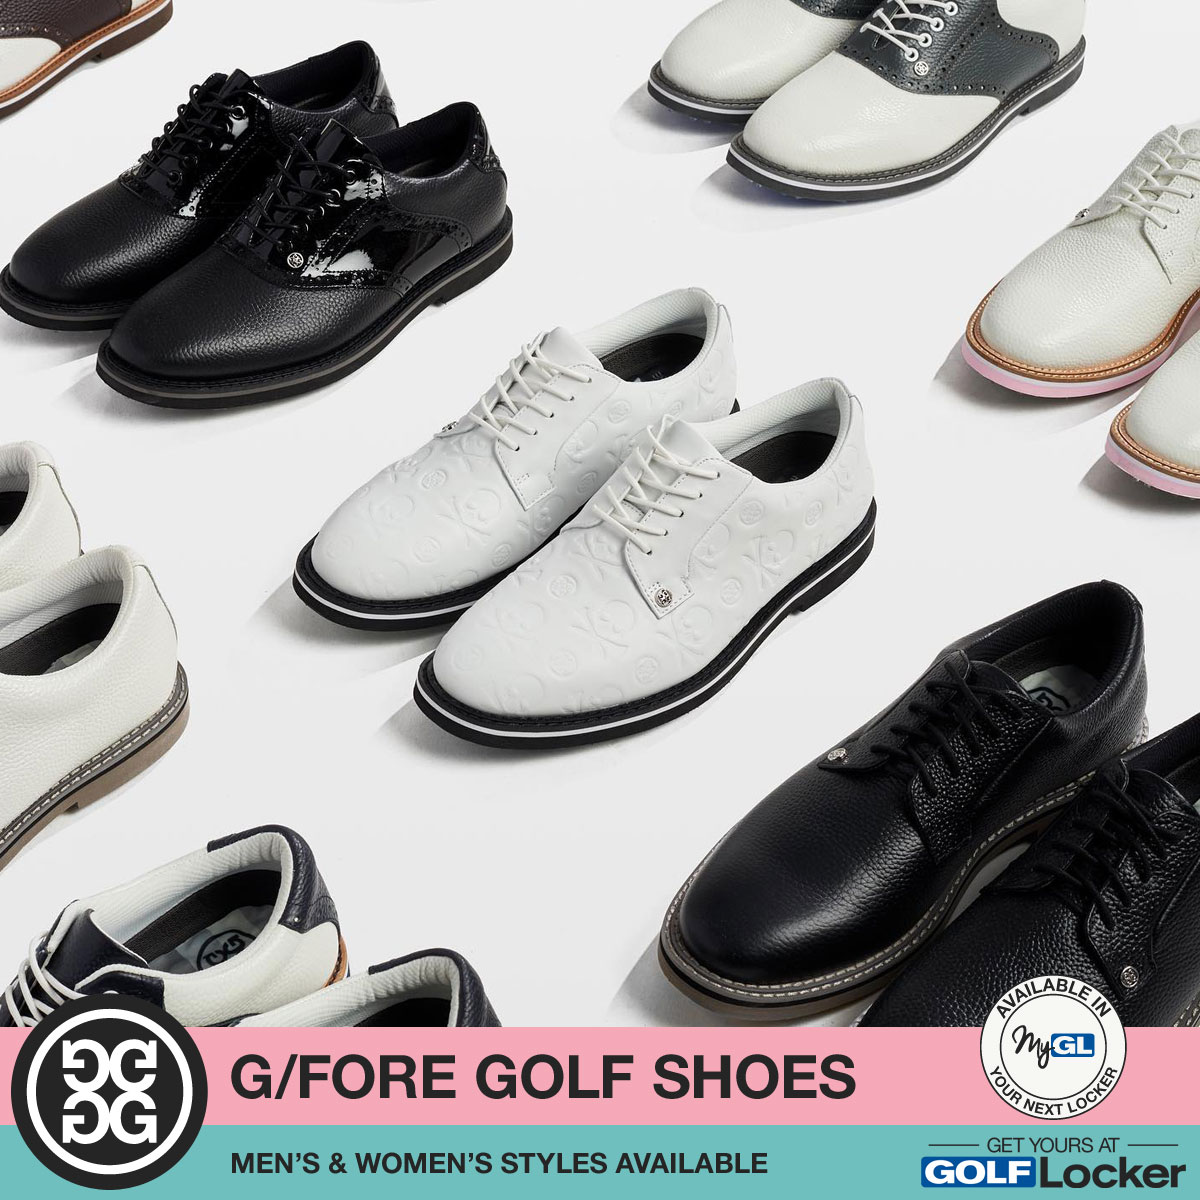 New G/FORE Shoes Now Shipping